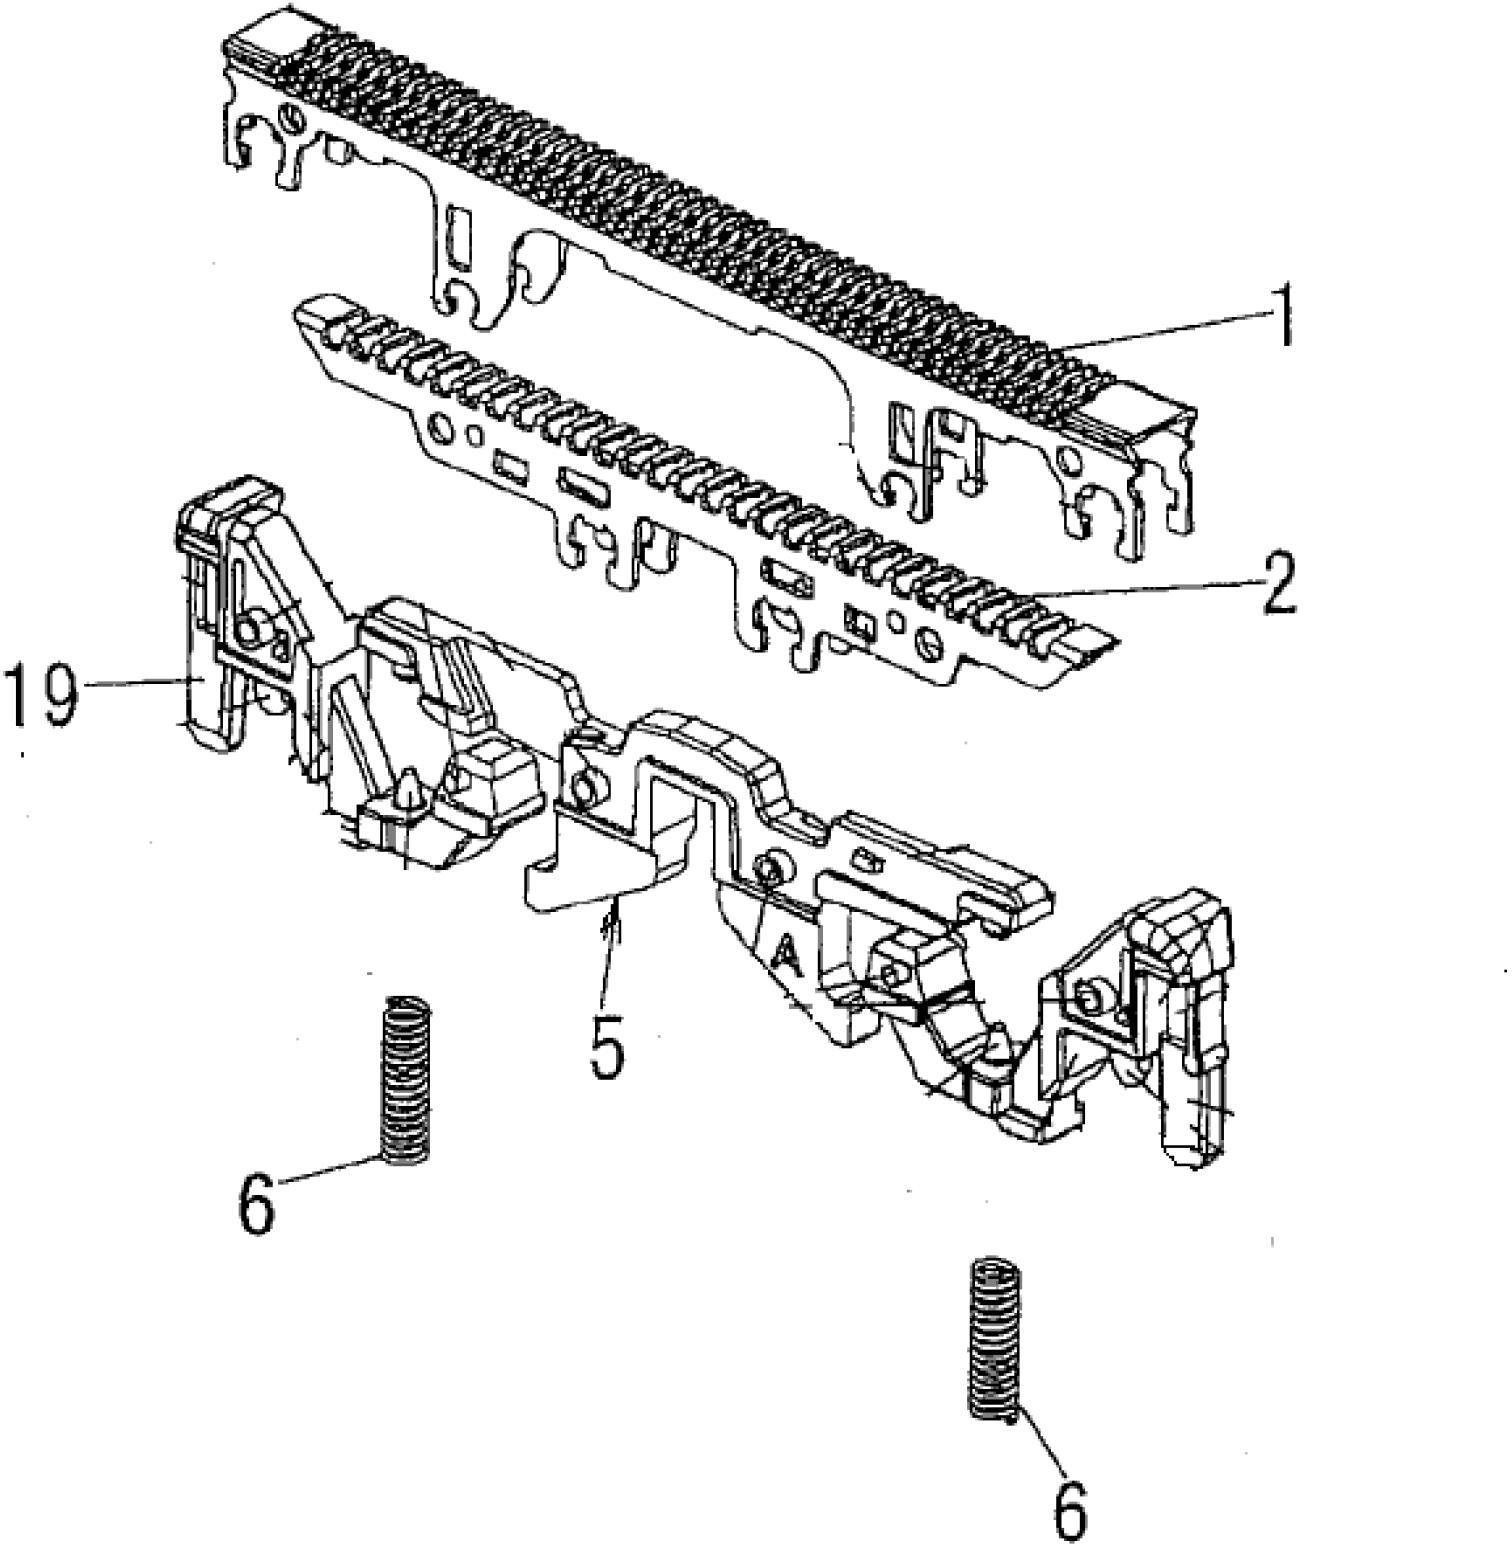 Shaver and reciprocating-type T-shaped cutting head